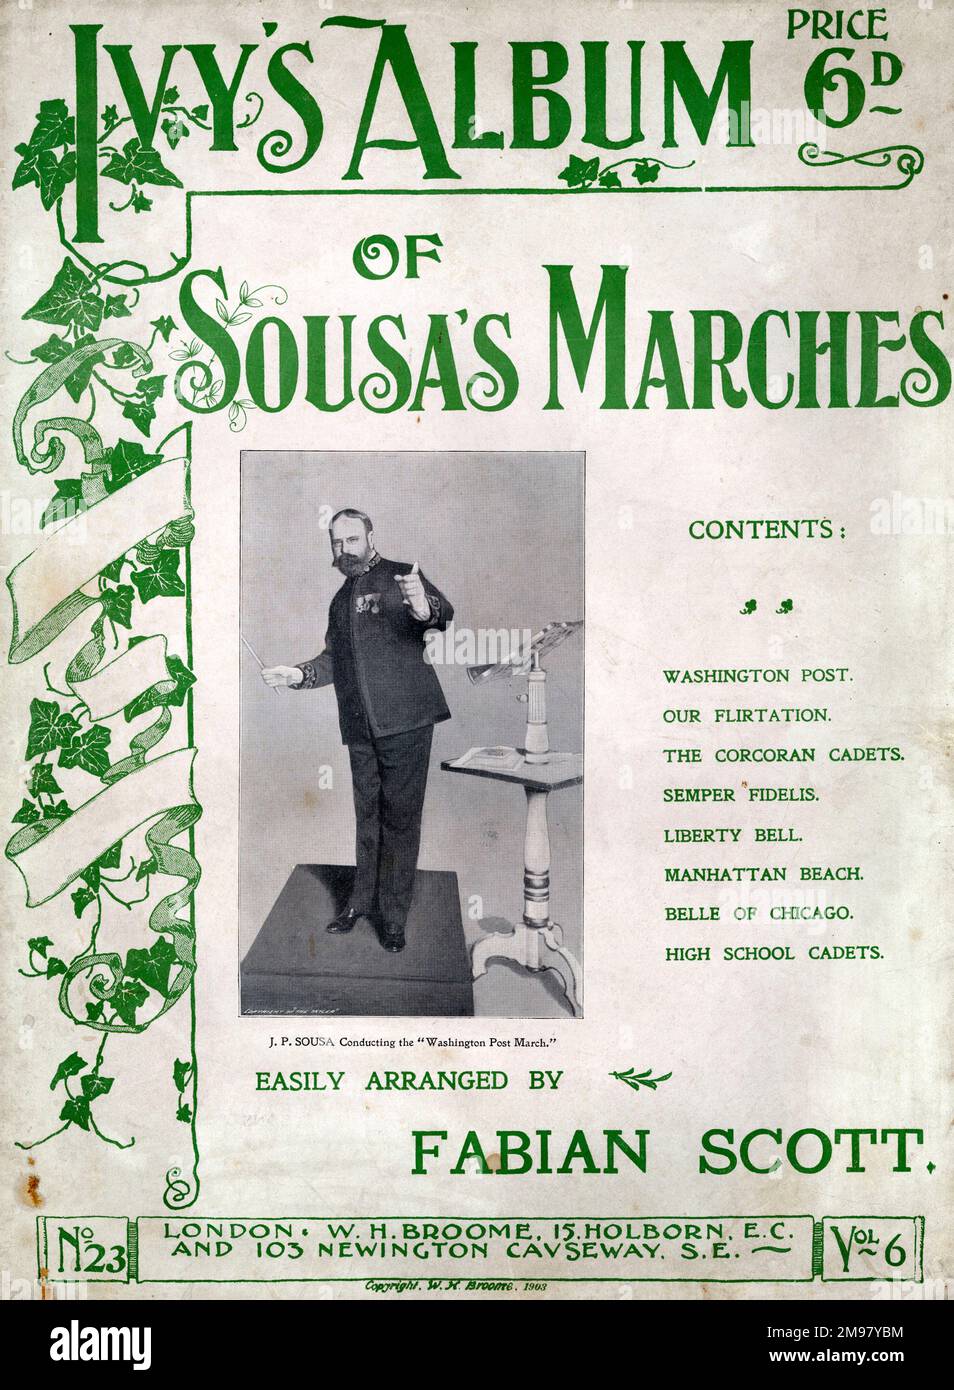 Music cover, Ivy's Album of Sousa's Marches, arranged by Fabian Scott. Stock Photo